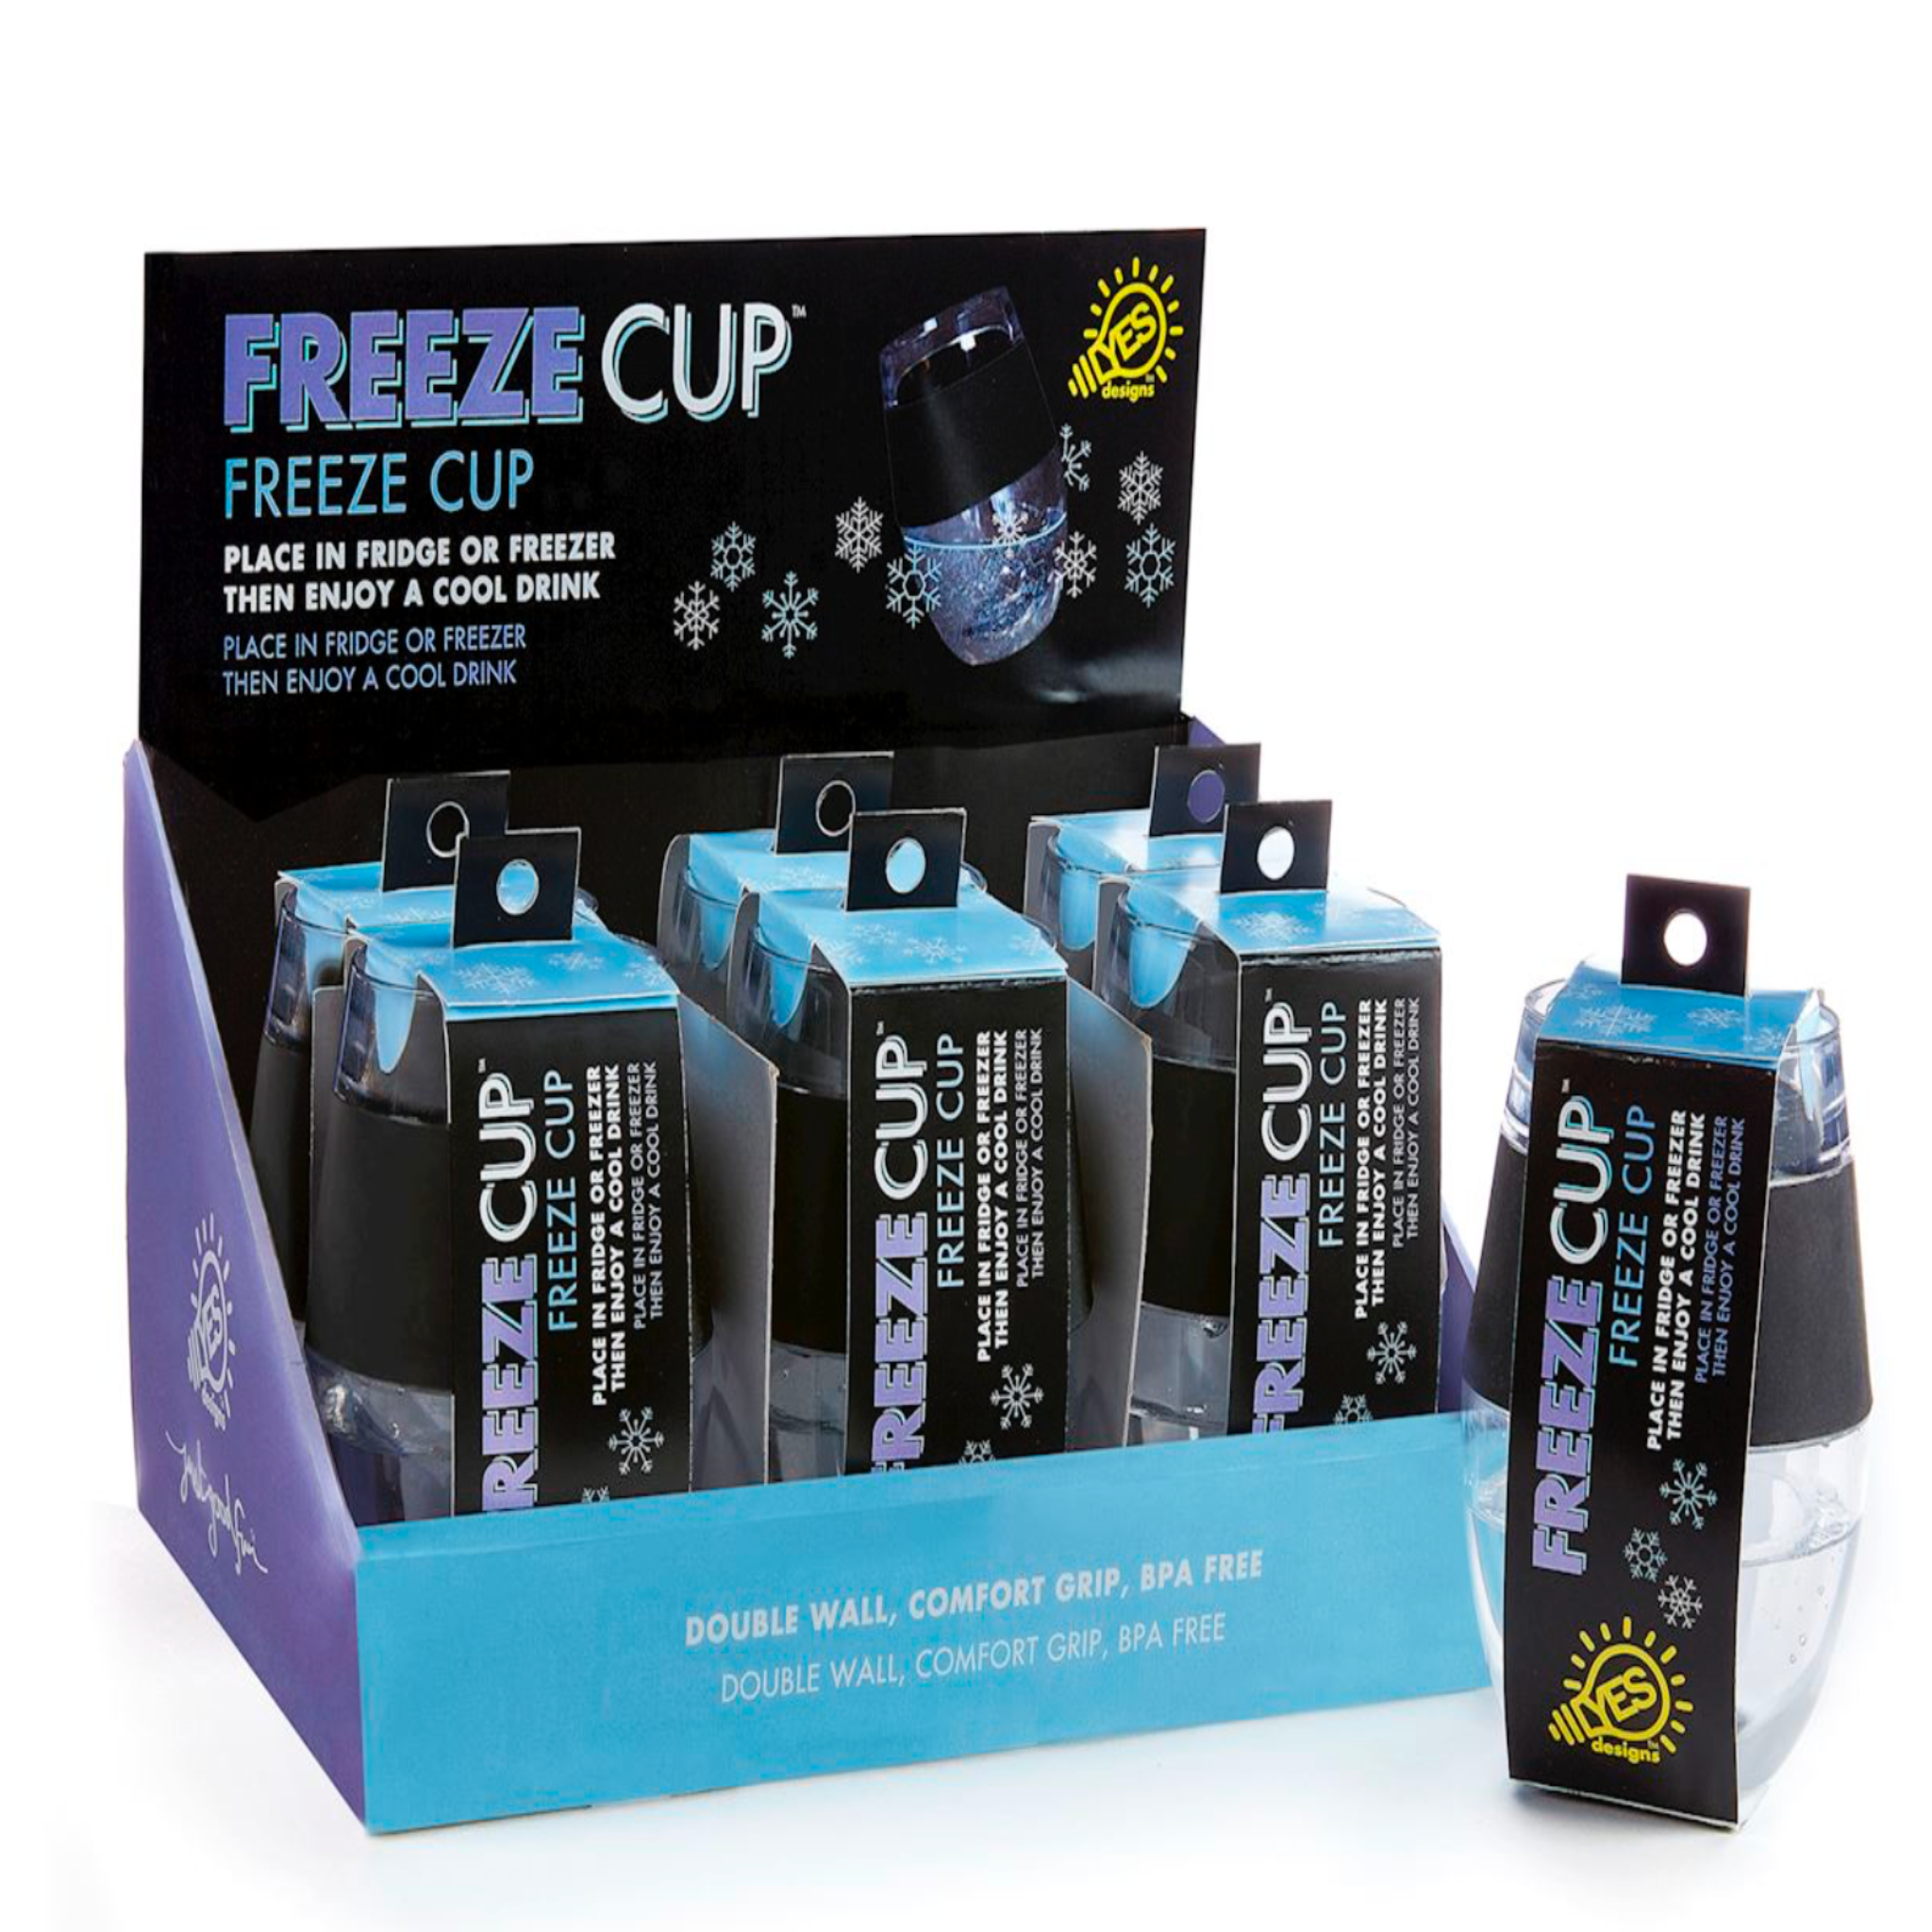 Double walled freeze cups